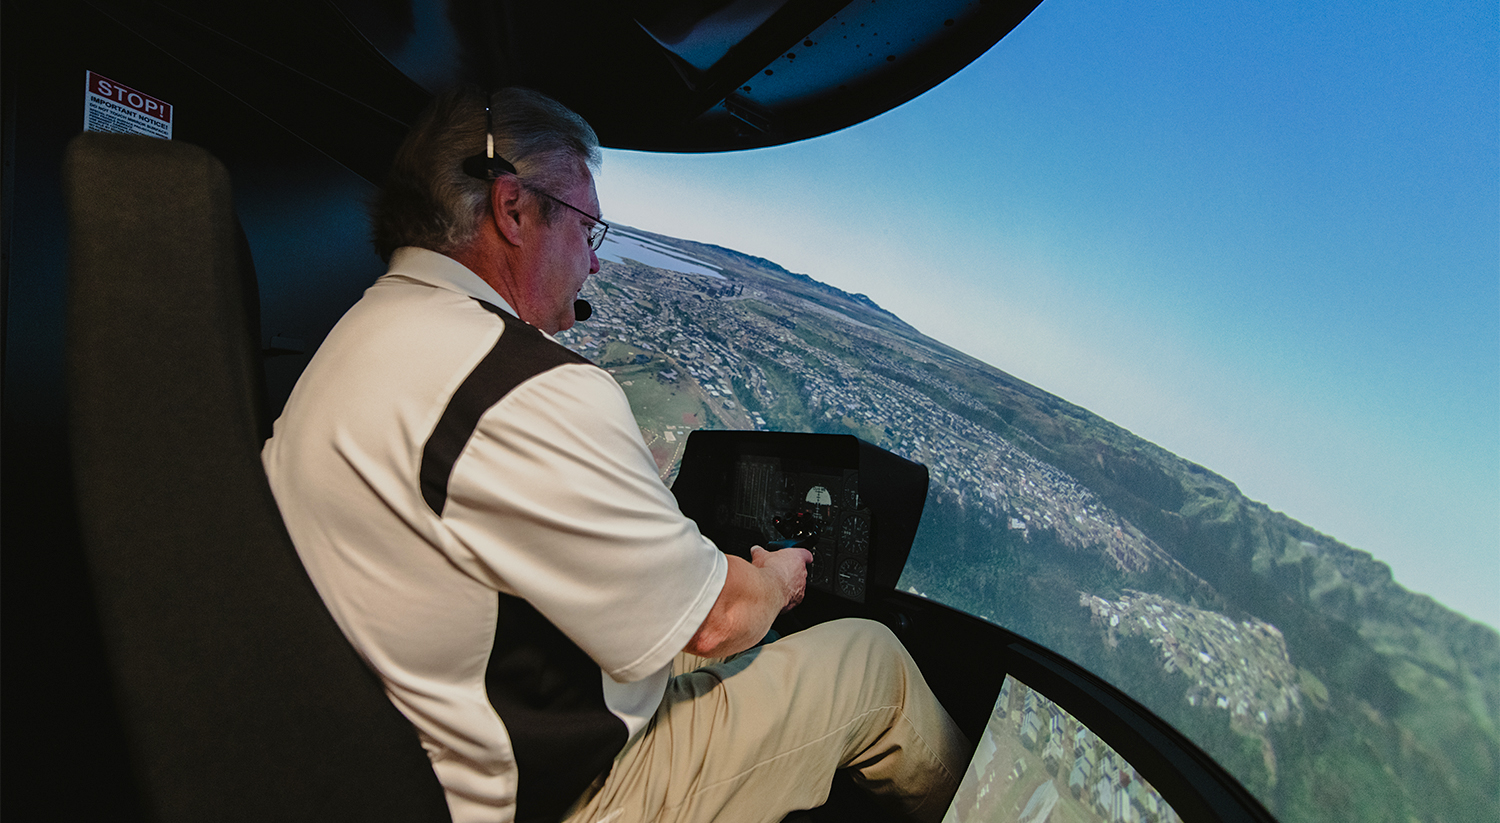 Helicopter Spatial Disorientation Simulator